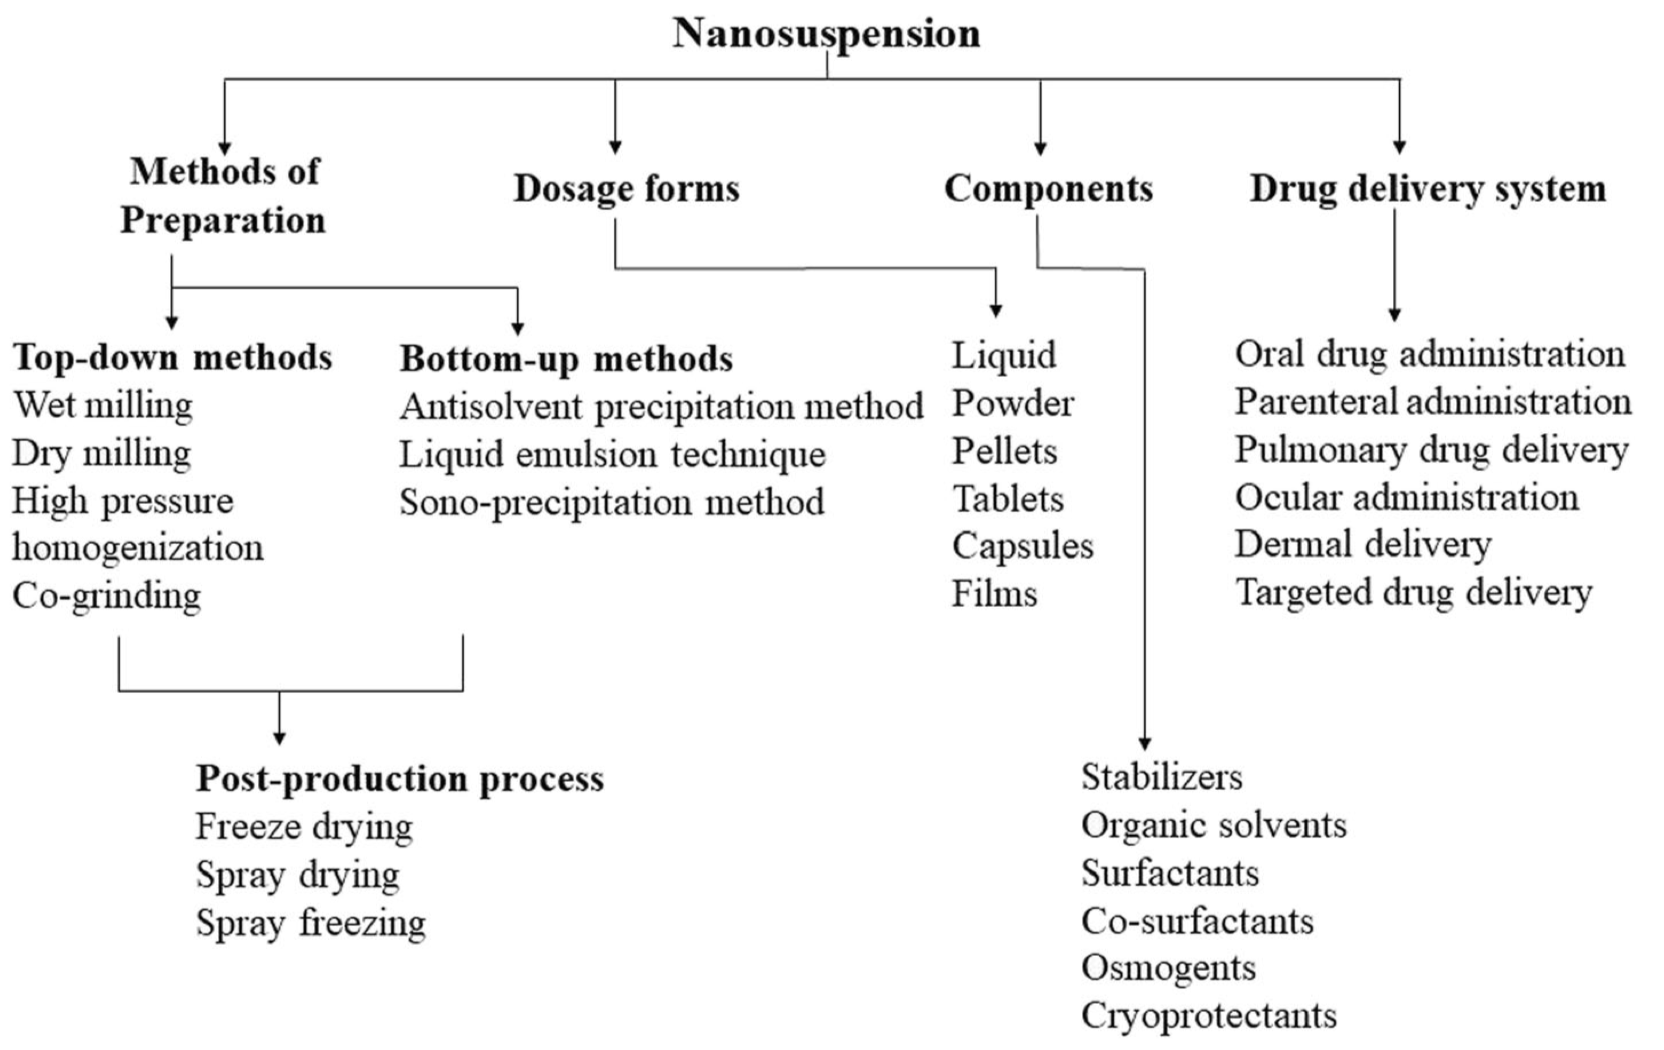 Schematic representation of method of preparation, dosage forms, components and applications of nanosuspensions in drug delivery systems